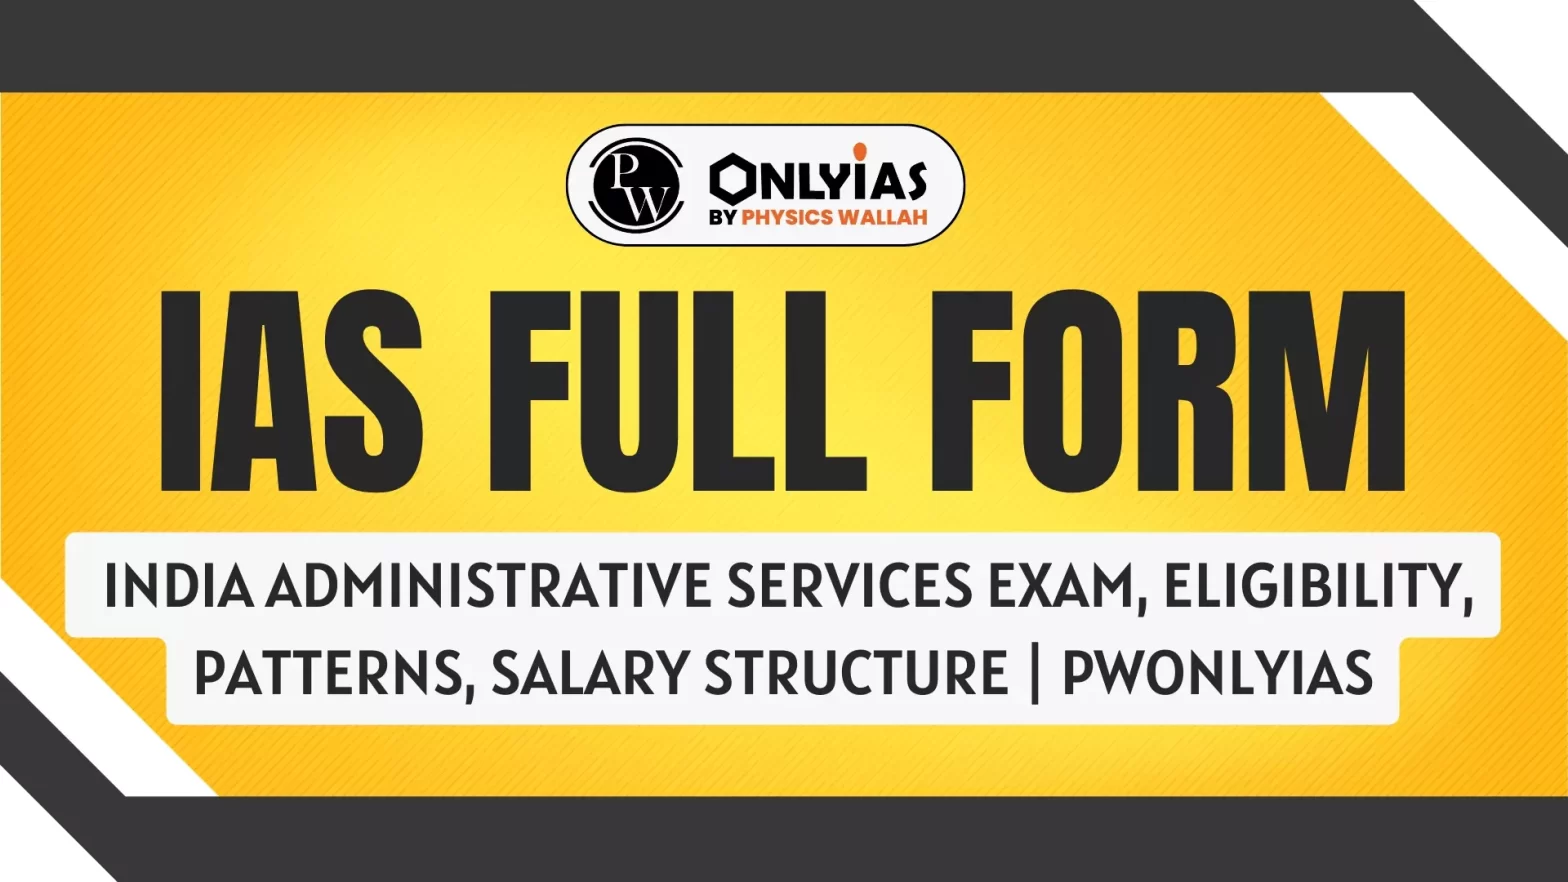 IAS Full form – India Administrative Services Exam, Eligibility, Patterns, Salary Structure